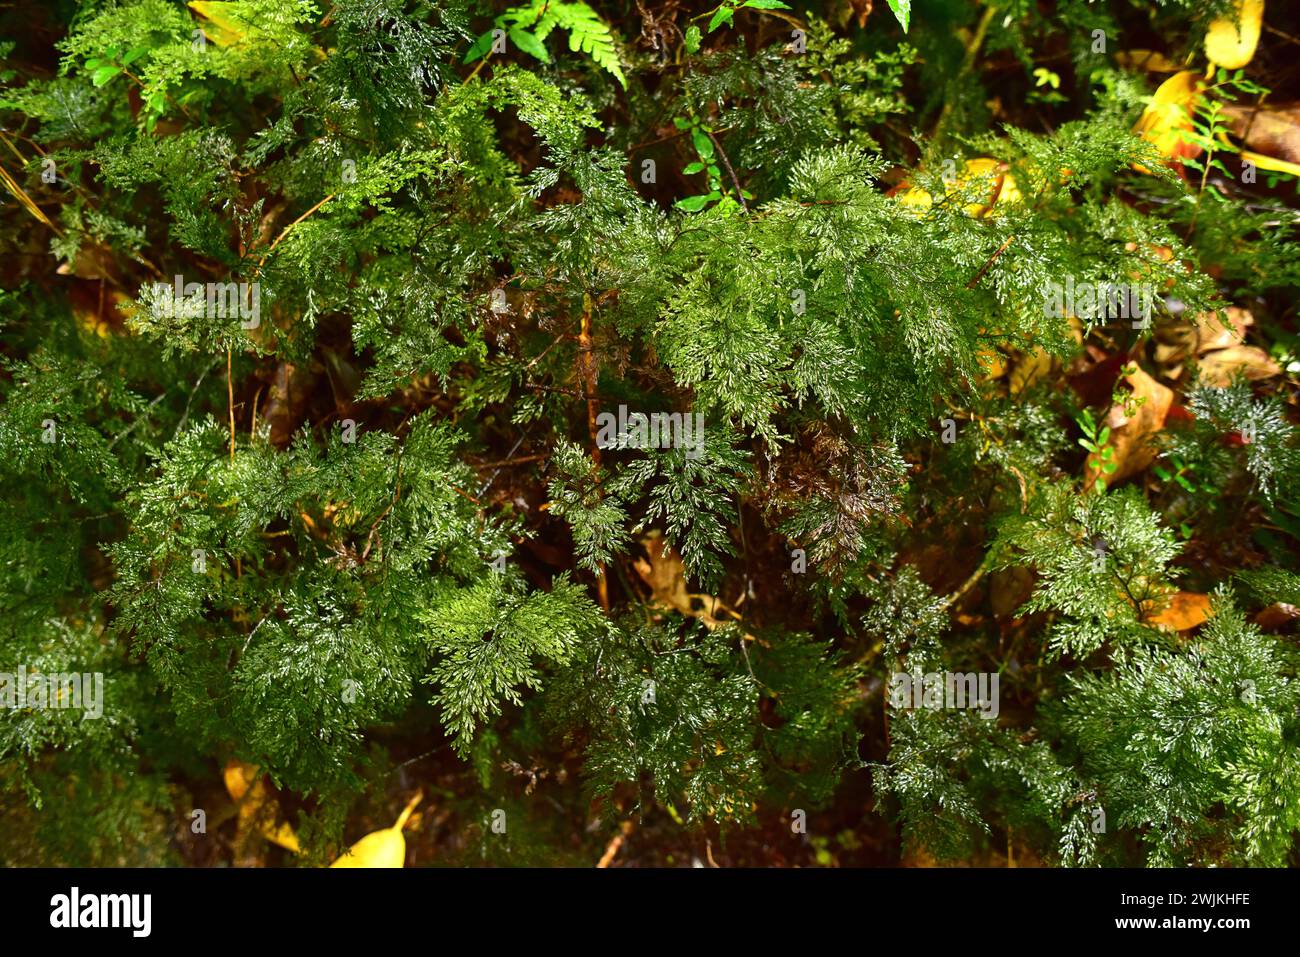 Hymenophyllum plicatum is a fern endemic to Argentina and Chile. This photo was taken in Alerce Andino National Park, Region de los Lagos, Chile. Stock Photo